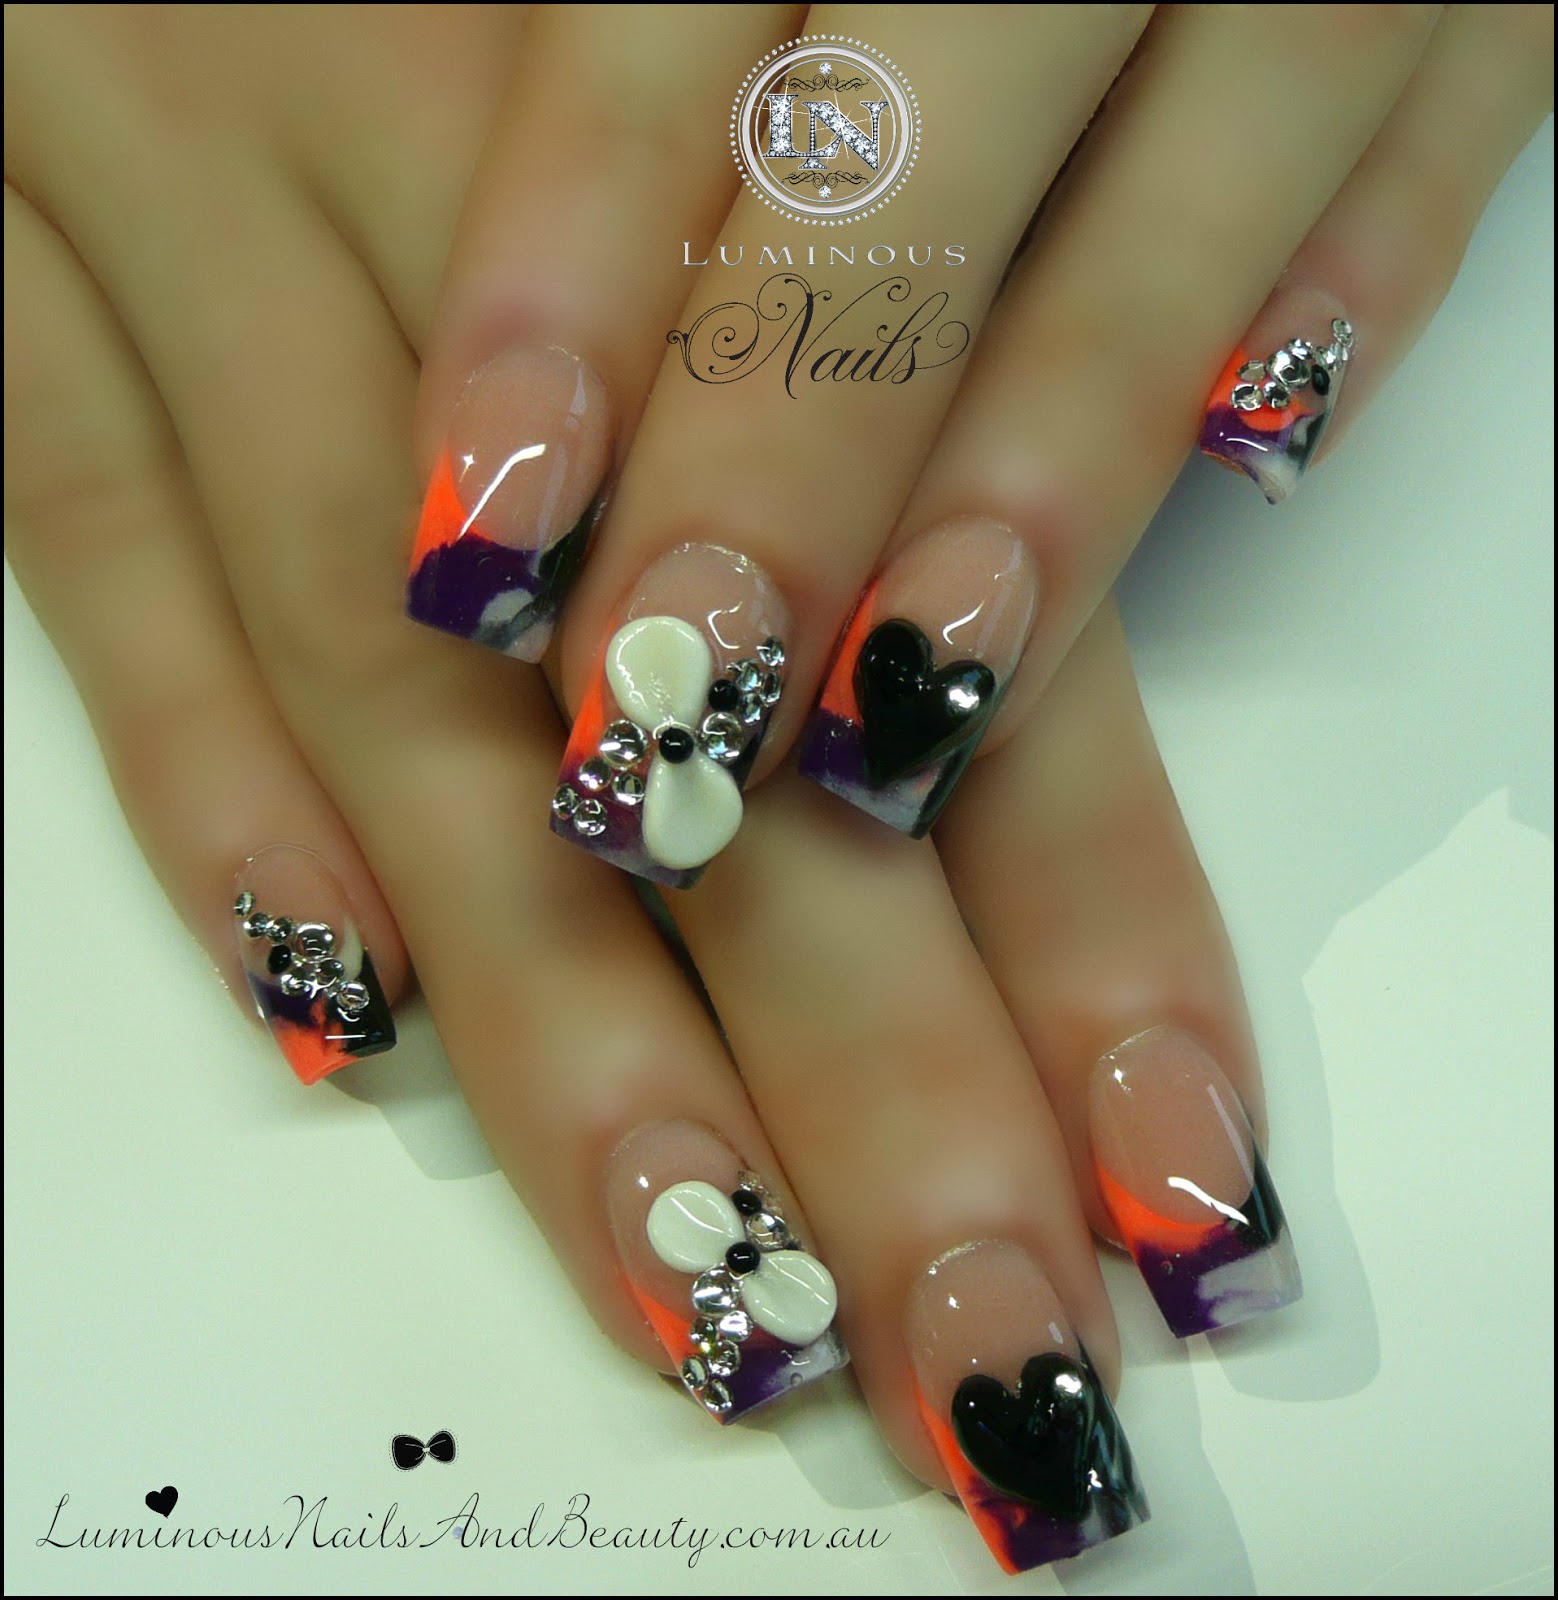 Luminous Nails & Beauty, Gold Coast Queensland. Acrylic Nails, Gel Nails, Spray Tans. Sculptured Acrylic with Rainbow Black, White & purple, Neon Peach, 3D bows & hearts, & Crystals.